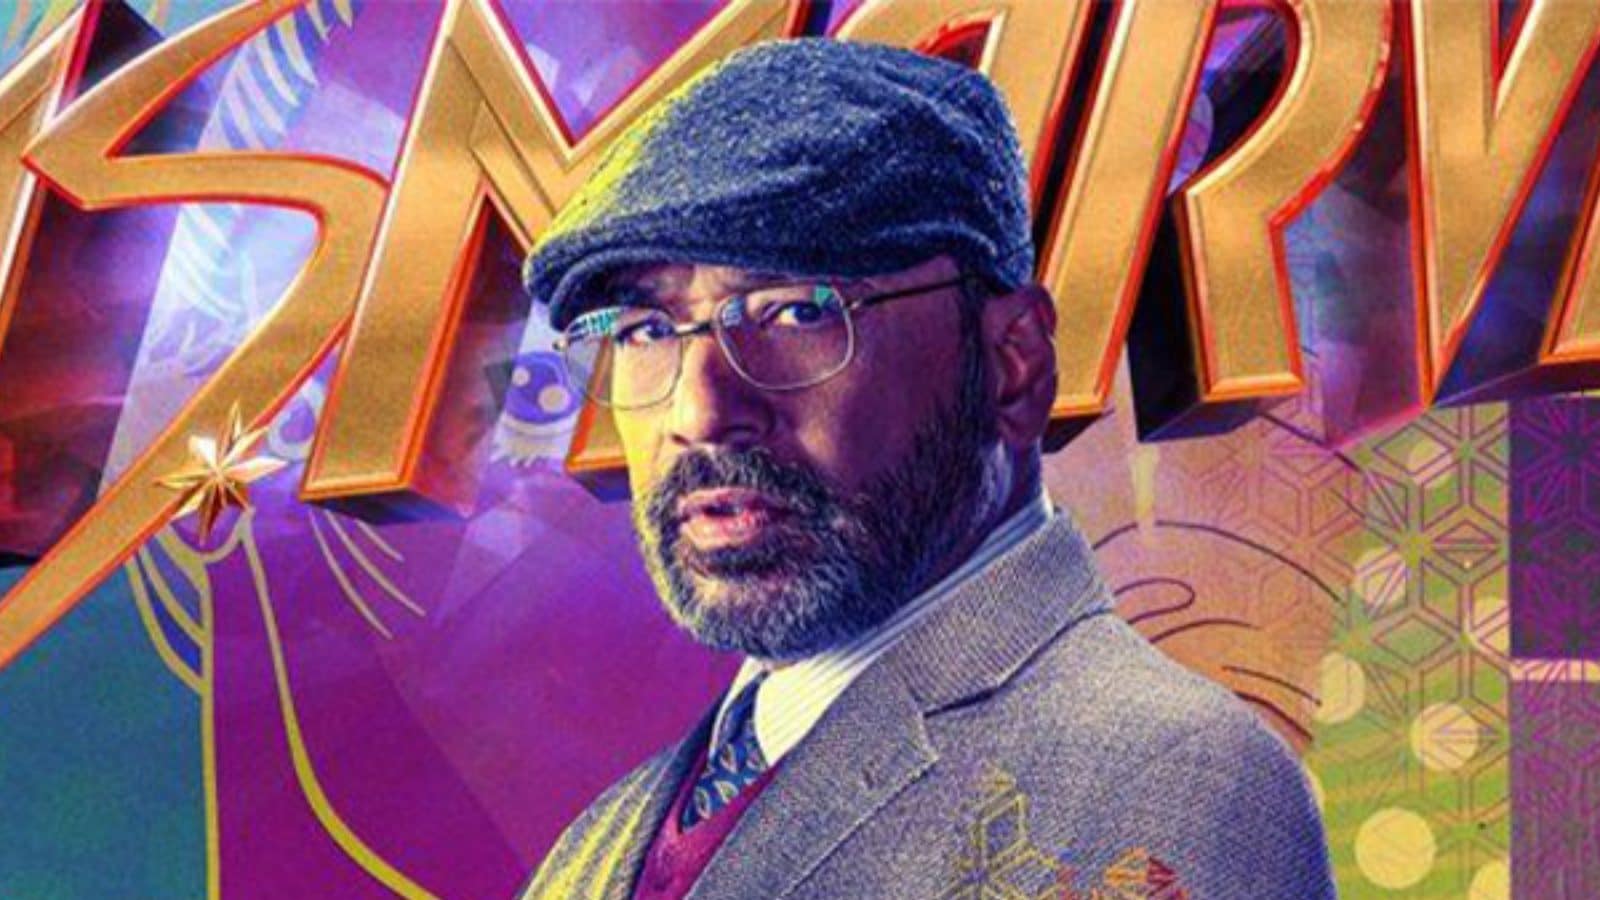 Ms Marvel Actor Mohan Kapur Accused Of Harassing 15-year Old, Details Inside